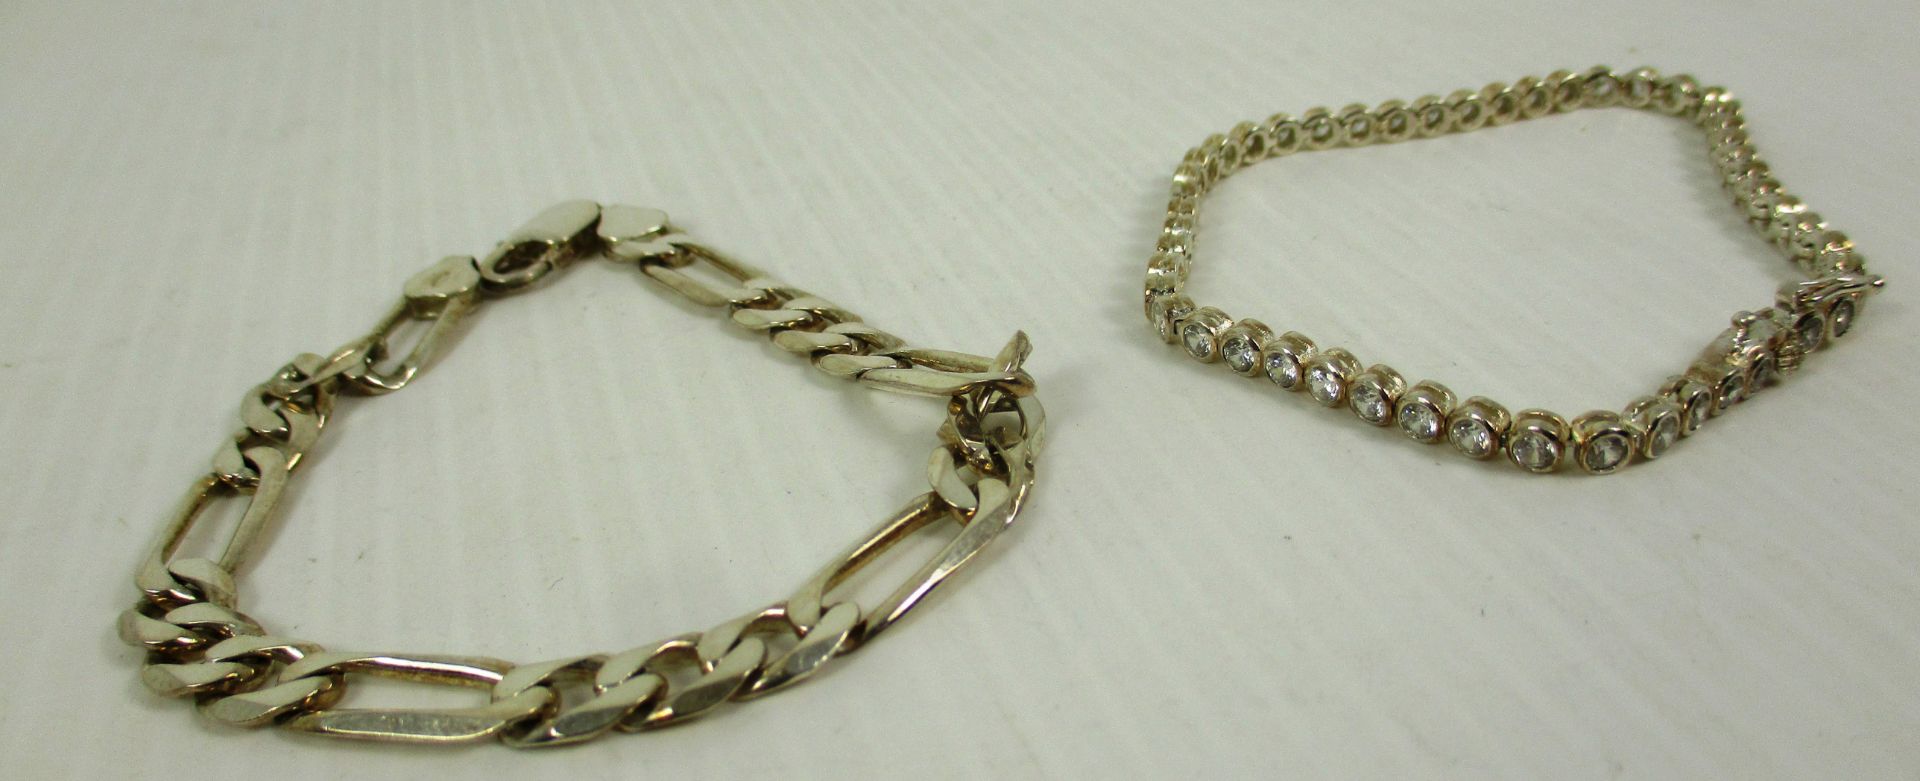 A silver flat link bracelet and another silver bracelet set with cubic Zirconia